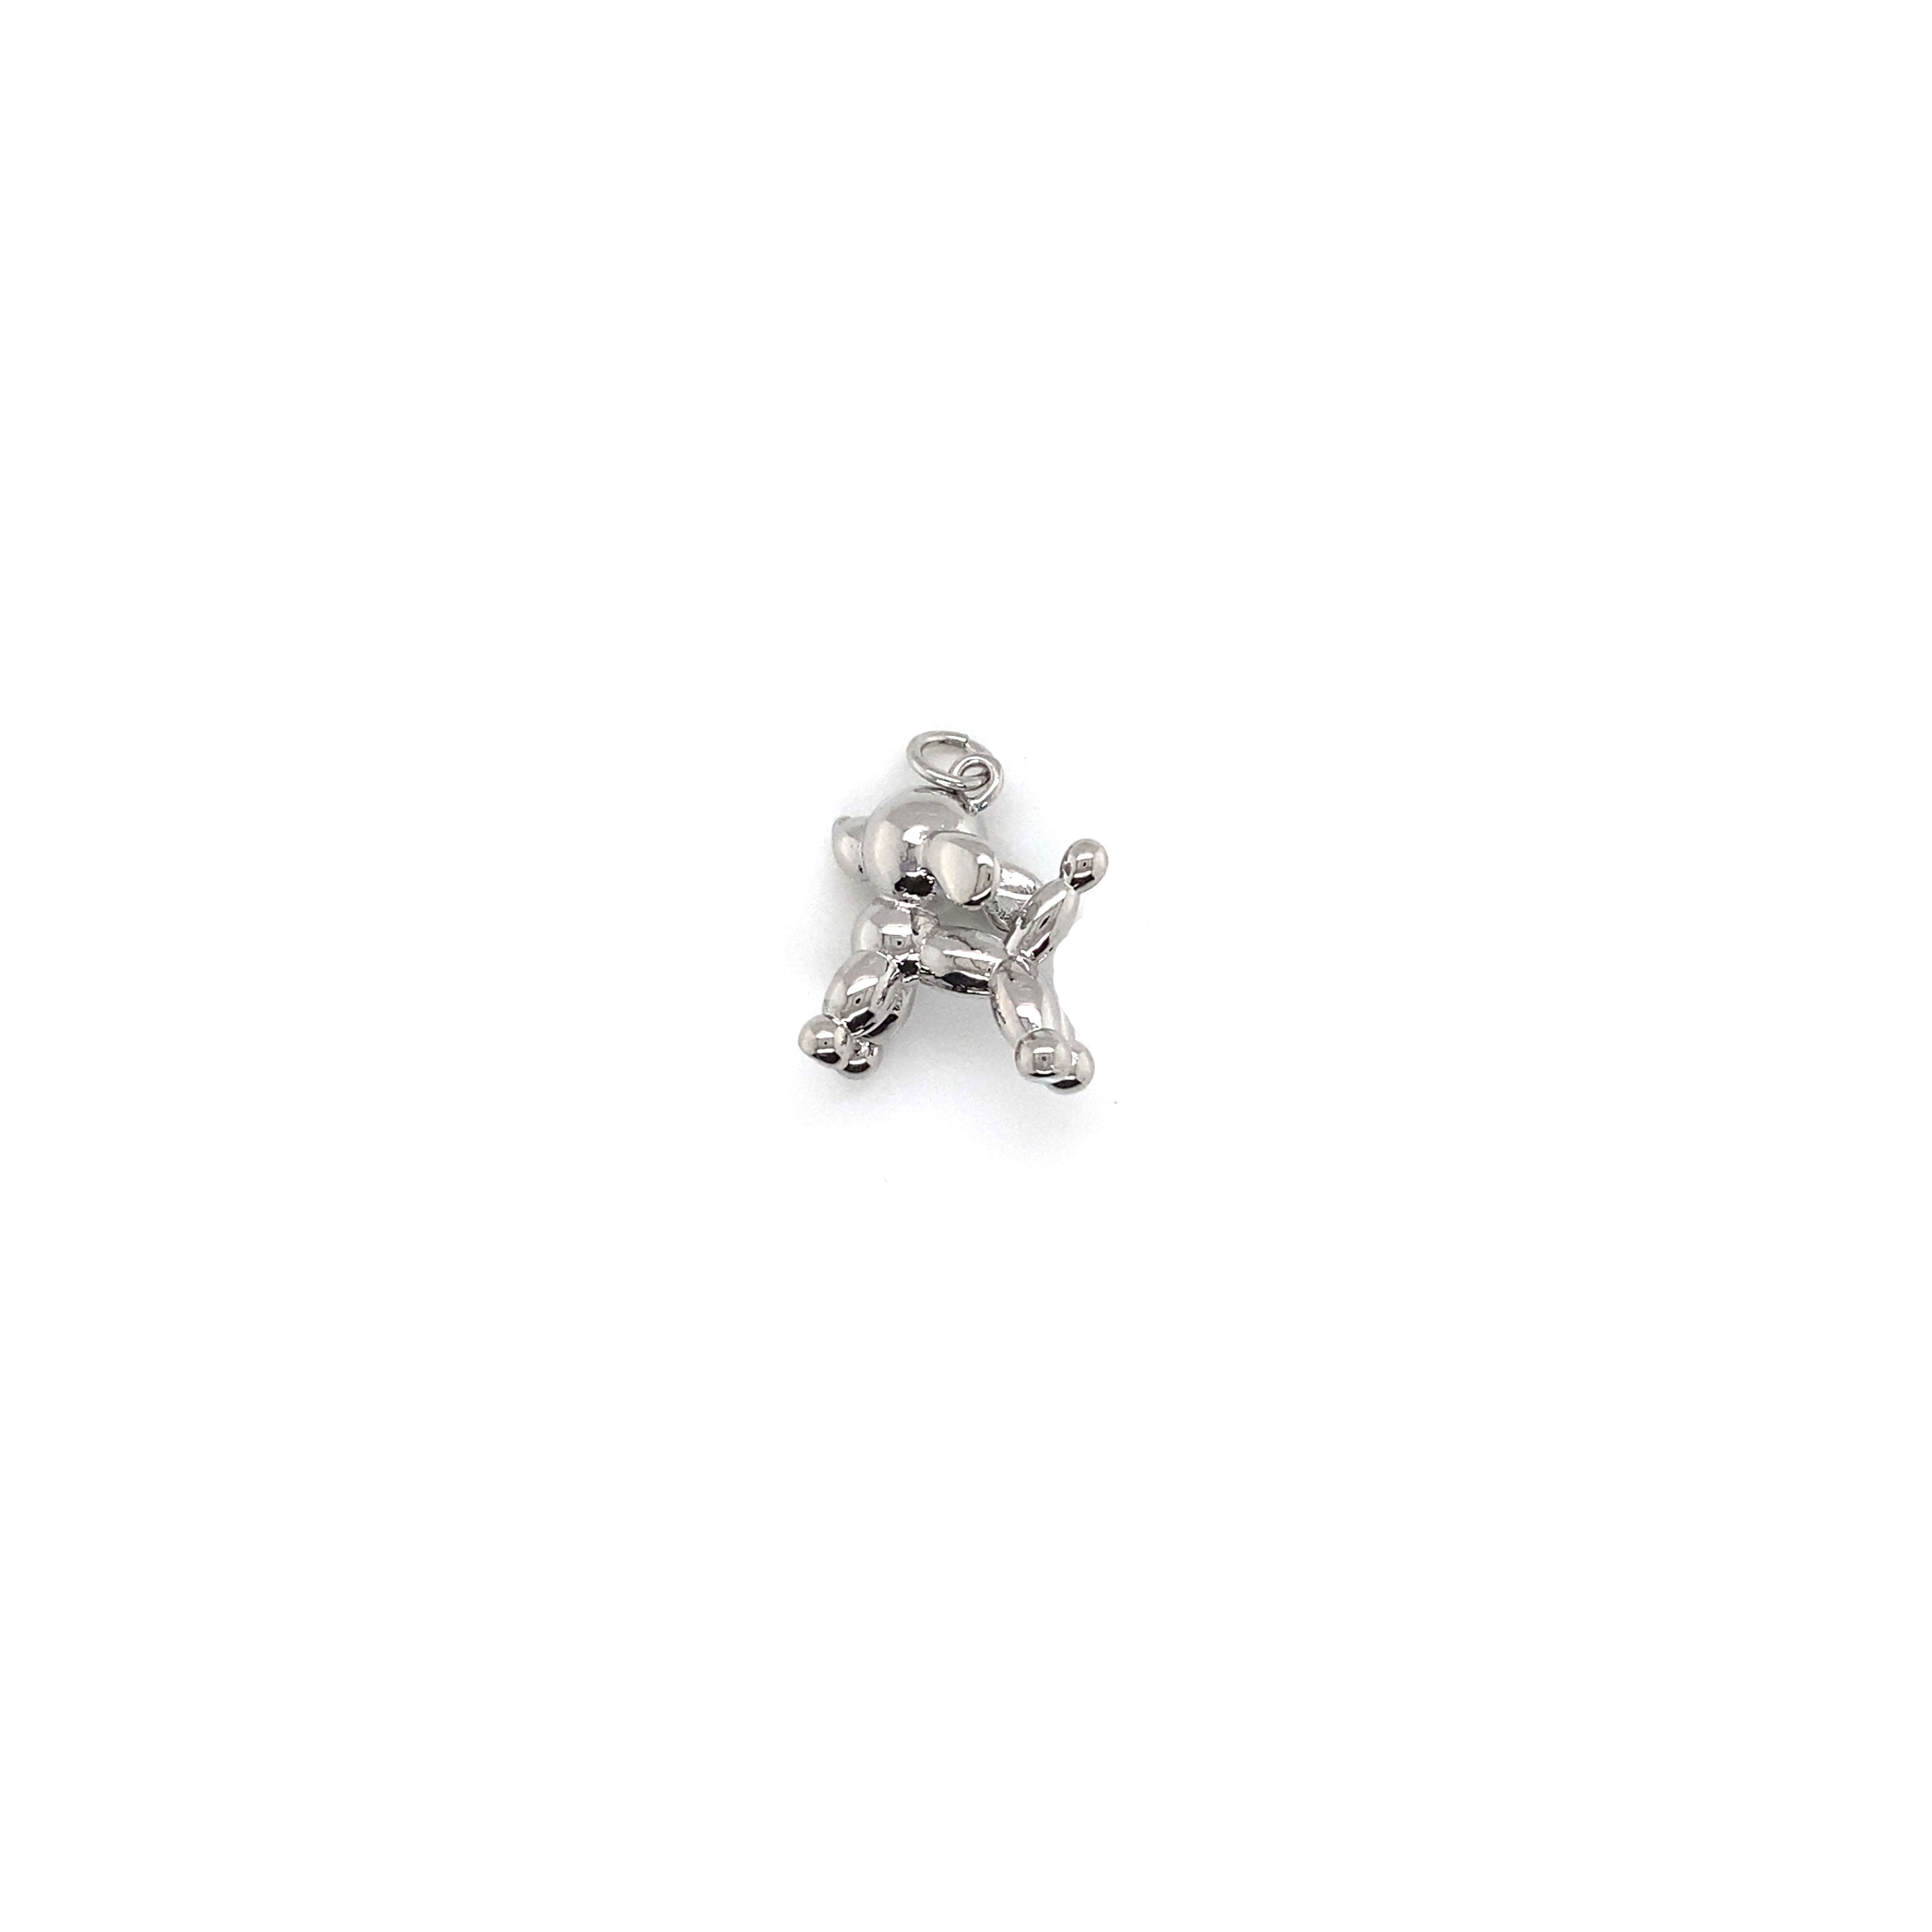 3D Poodle Charm - Silver Plated